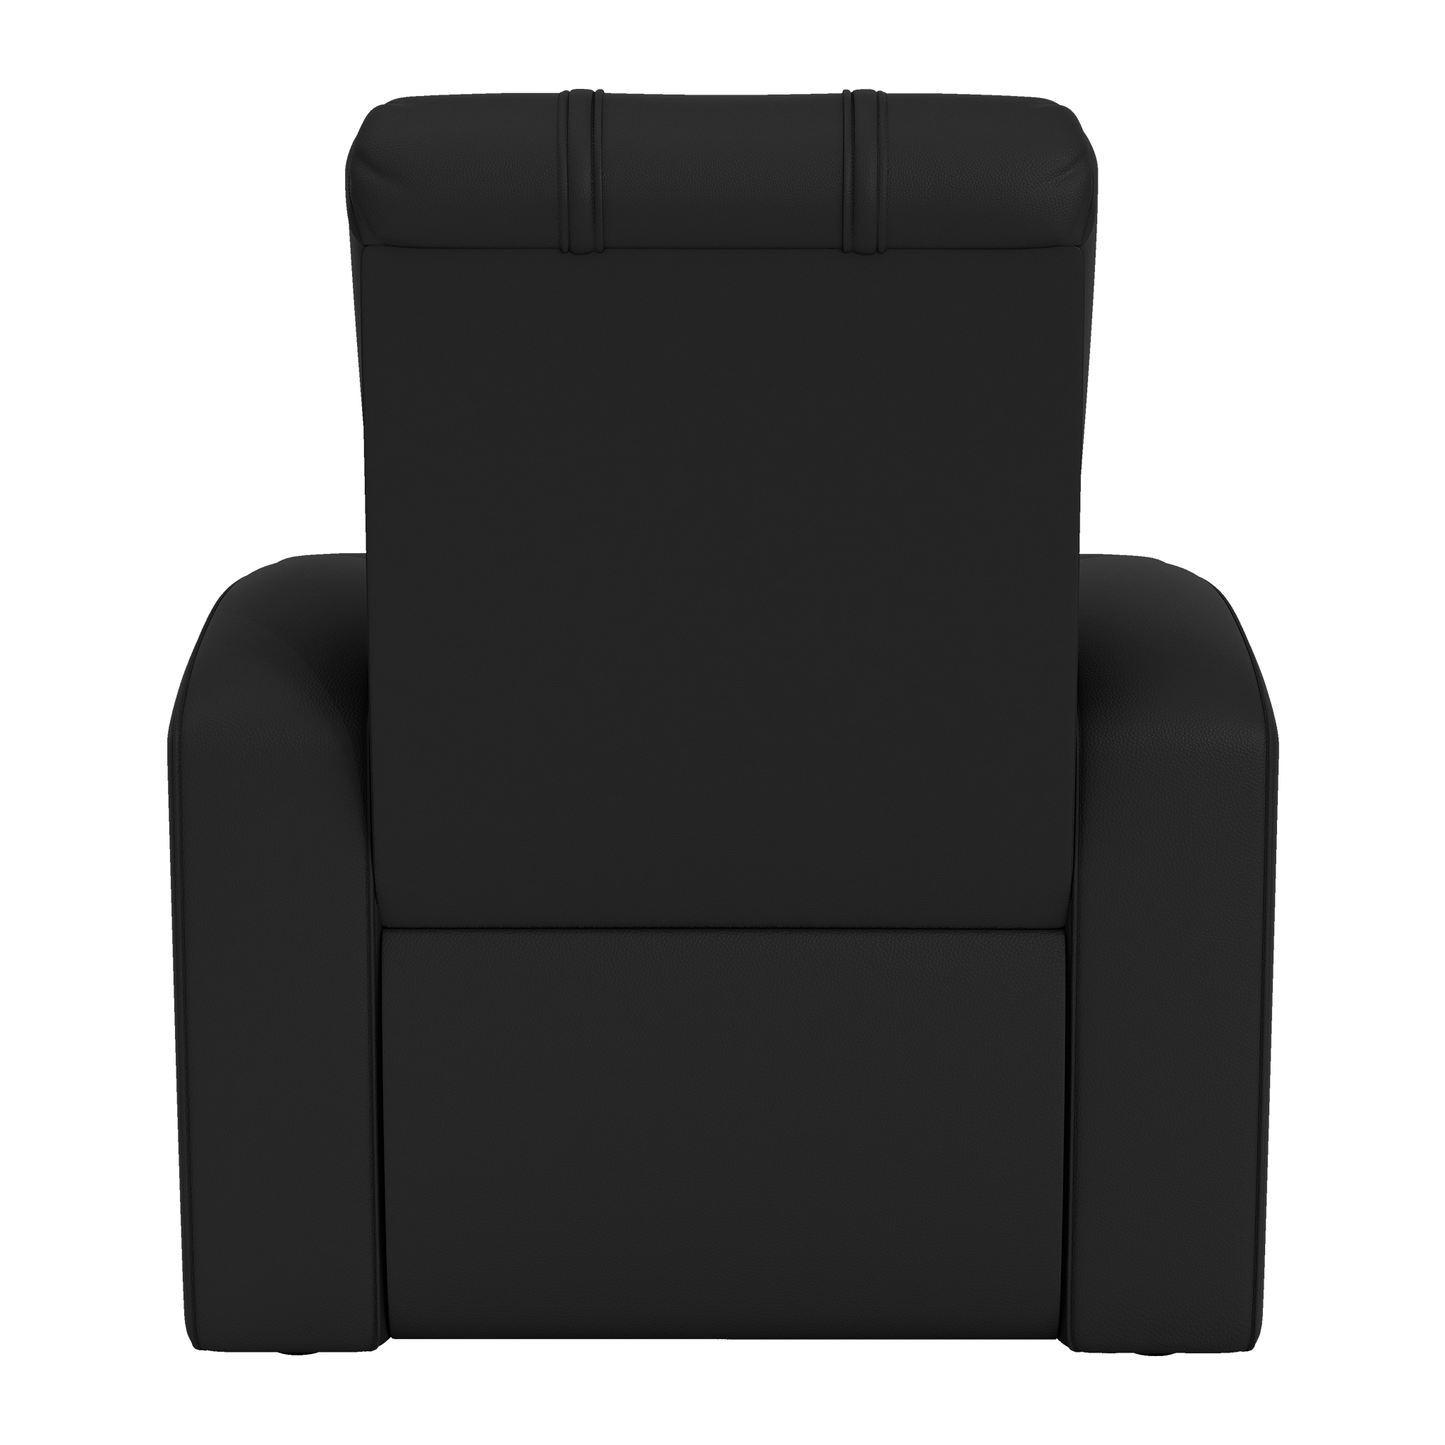 Relax Home Theater Recliner with Memphis Grizz Gaming Logo